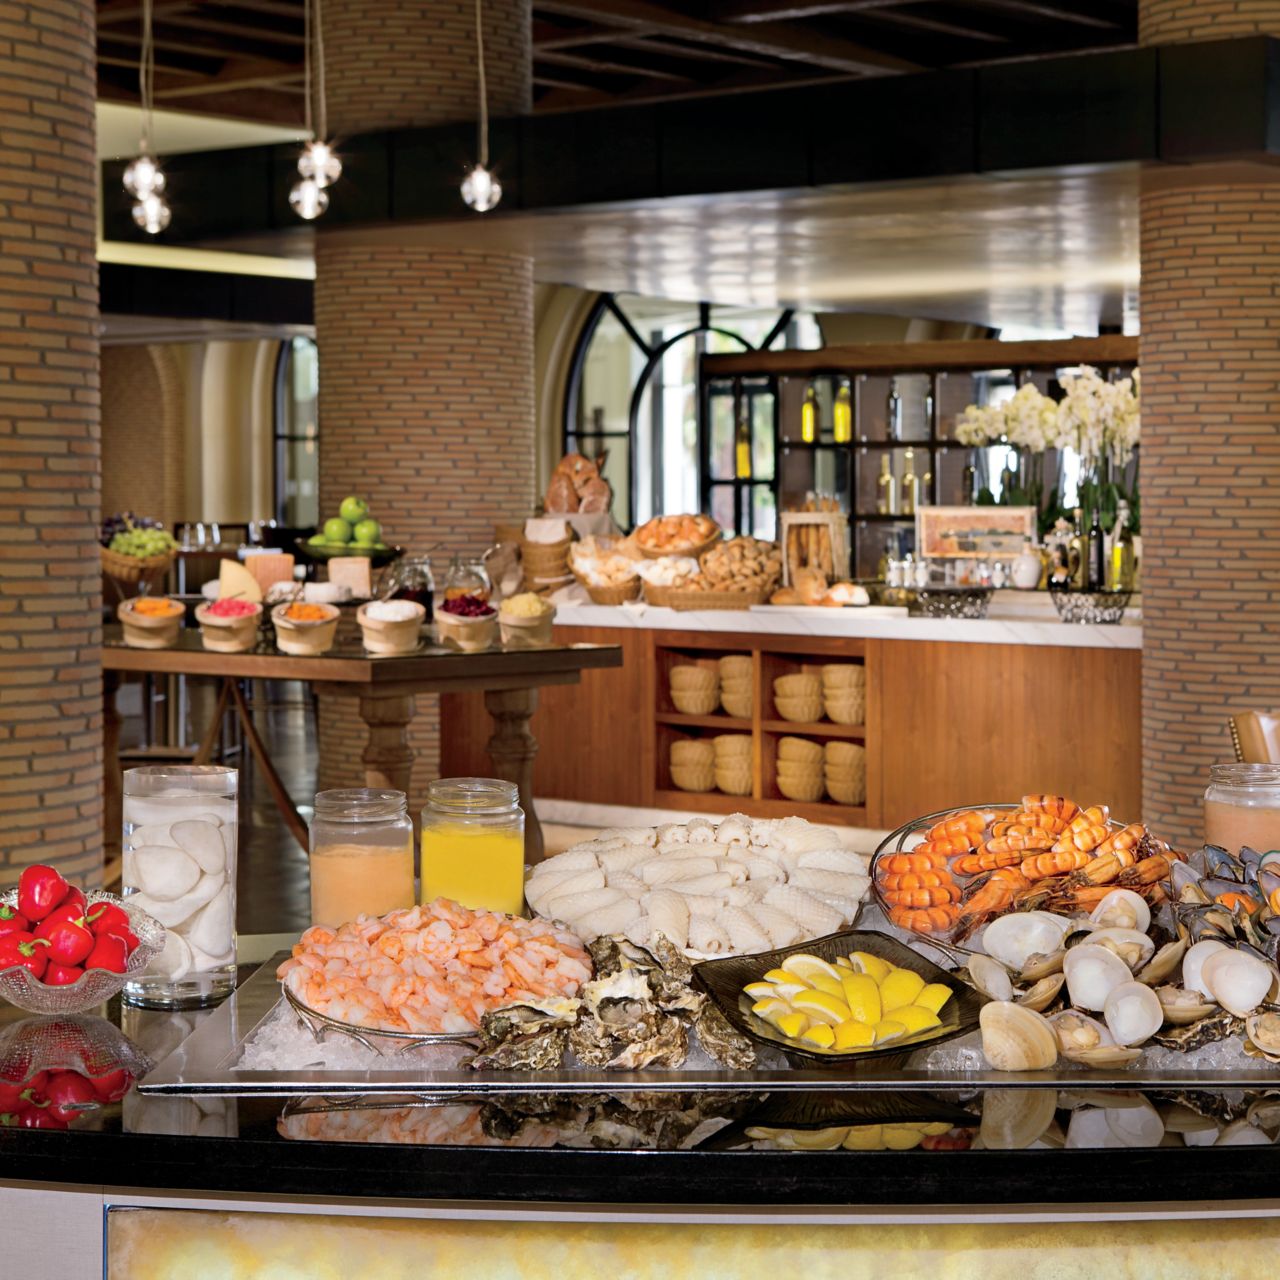 Buffet display of shrimp, seafood, citrus, drinks and more